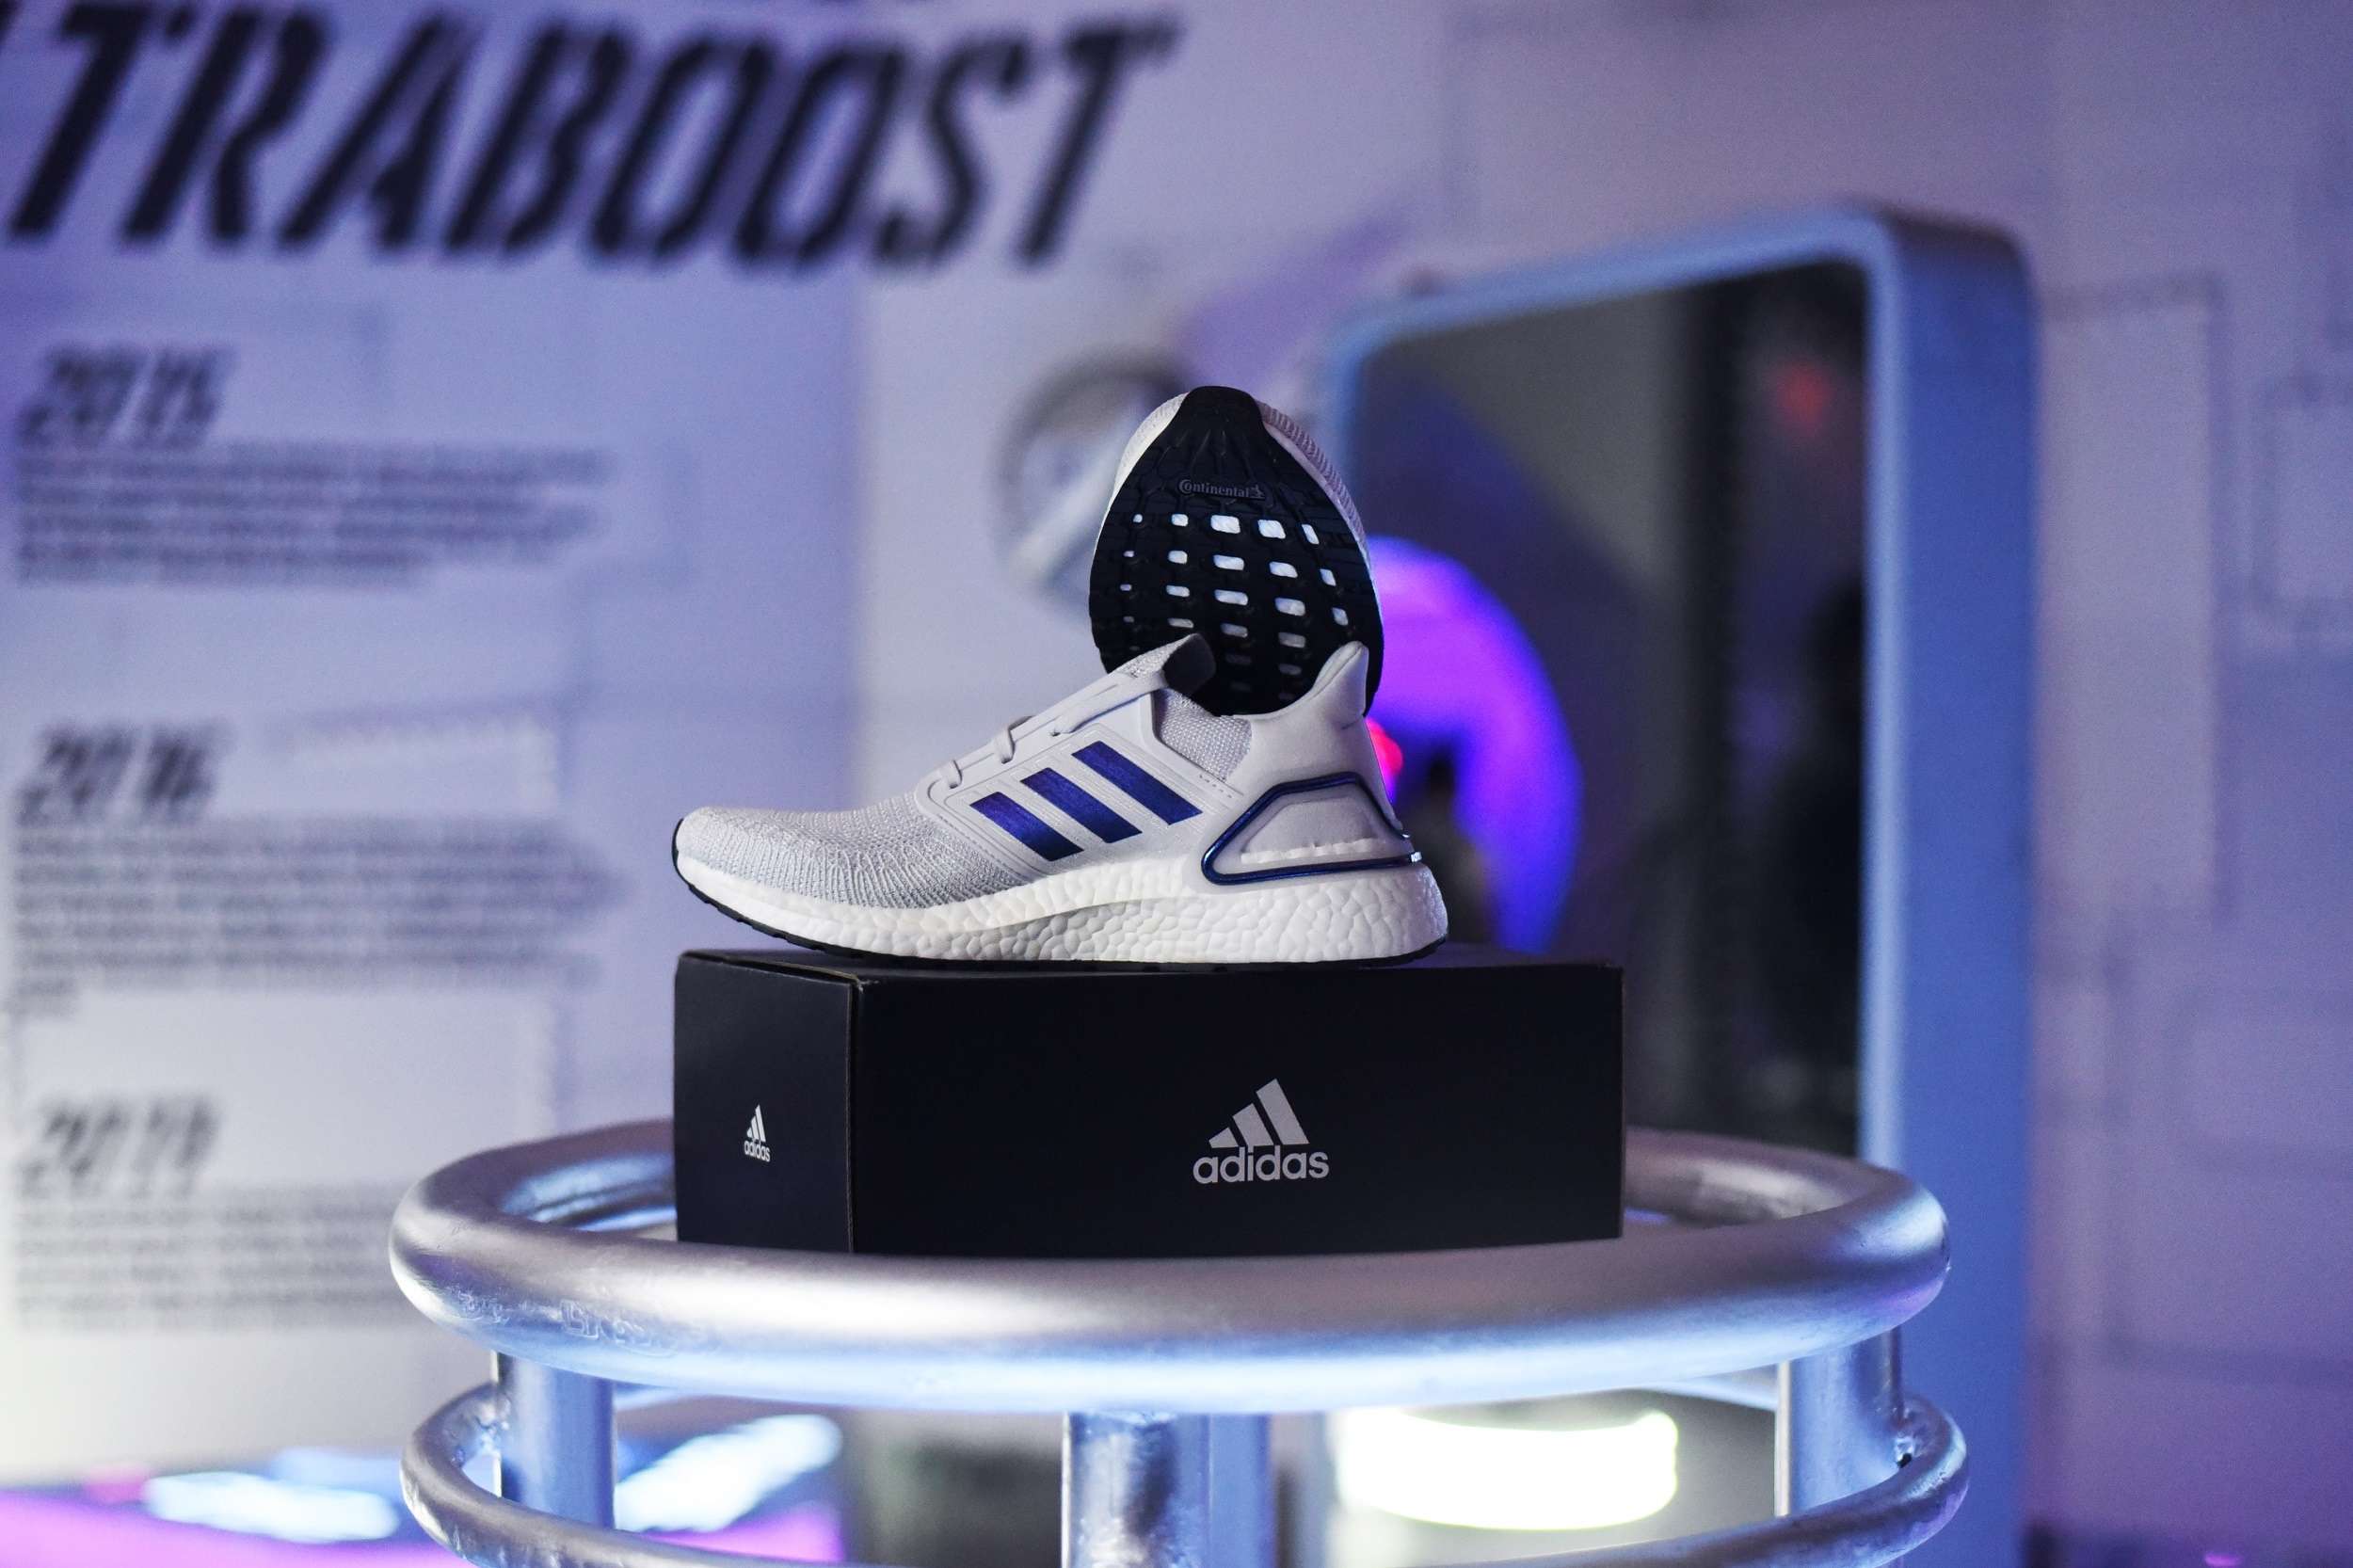 adidas product launch